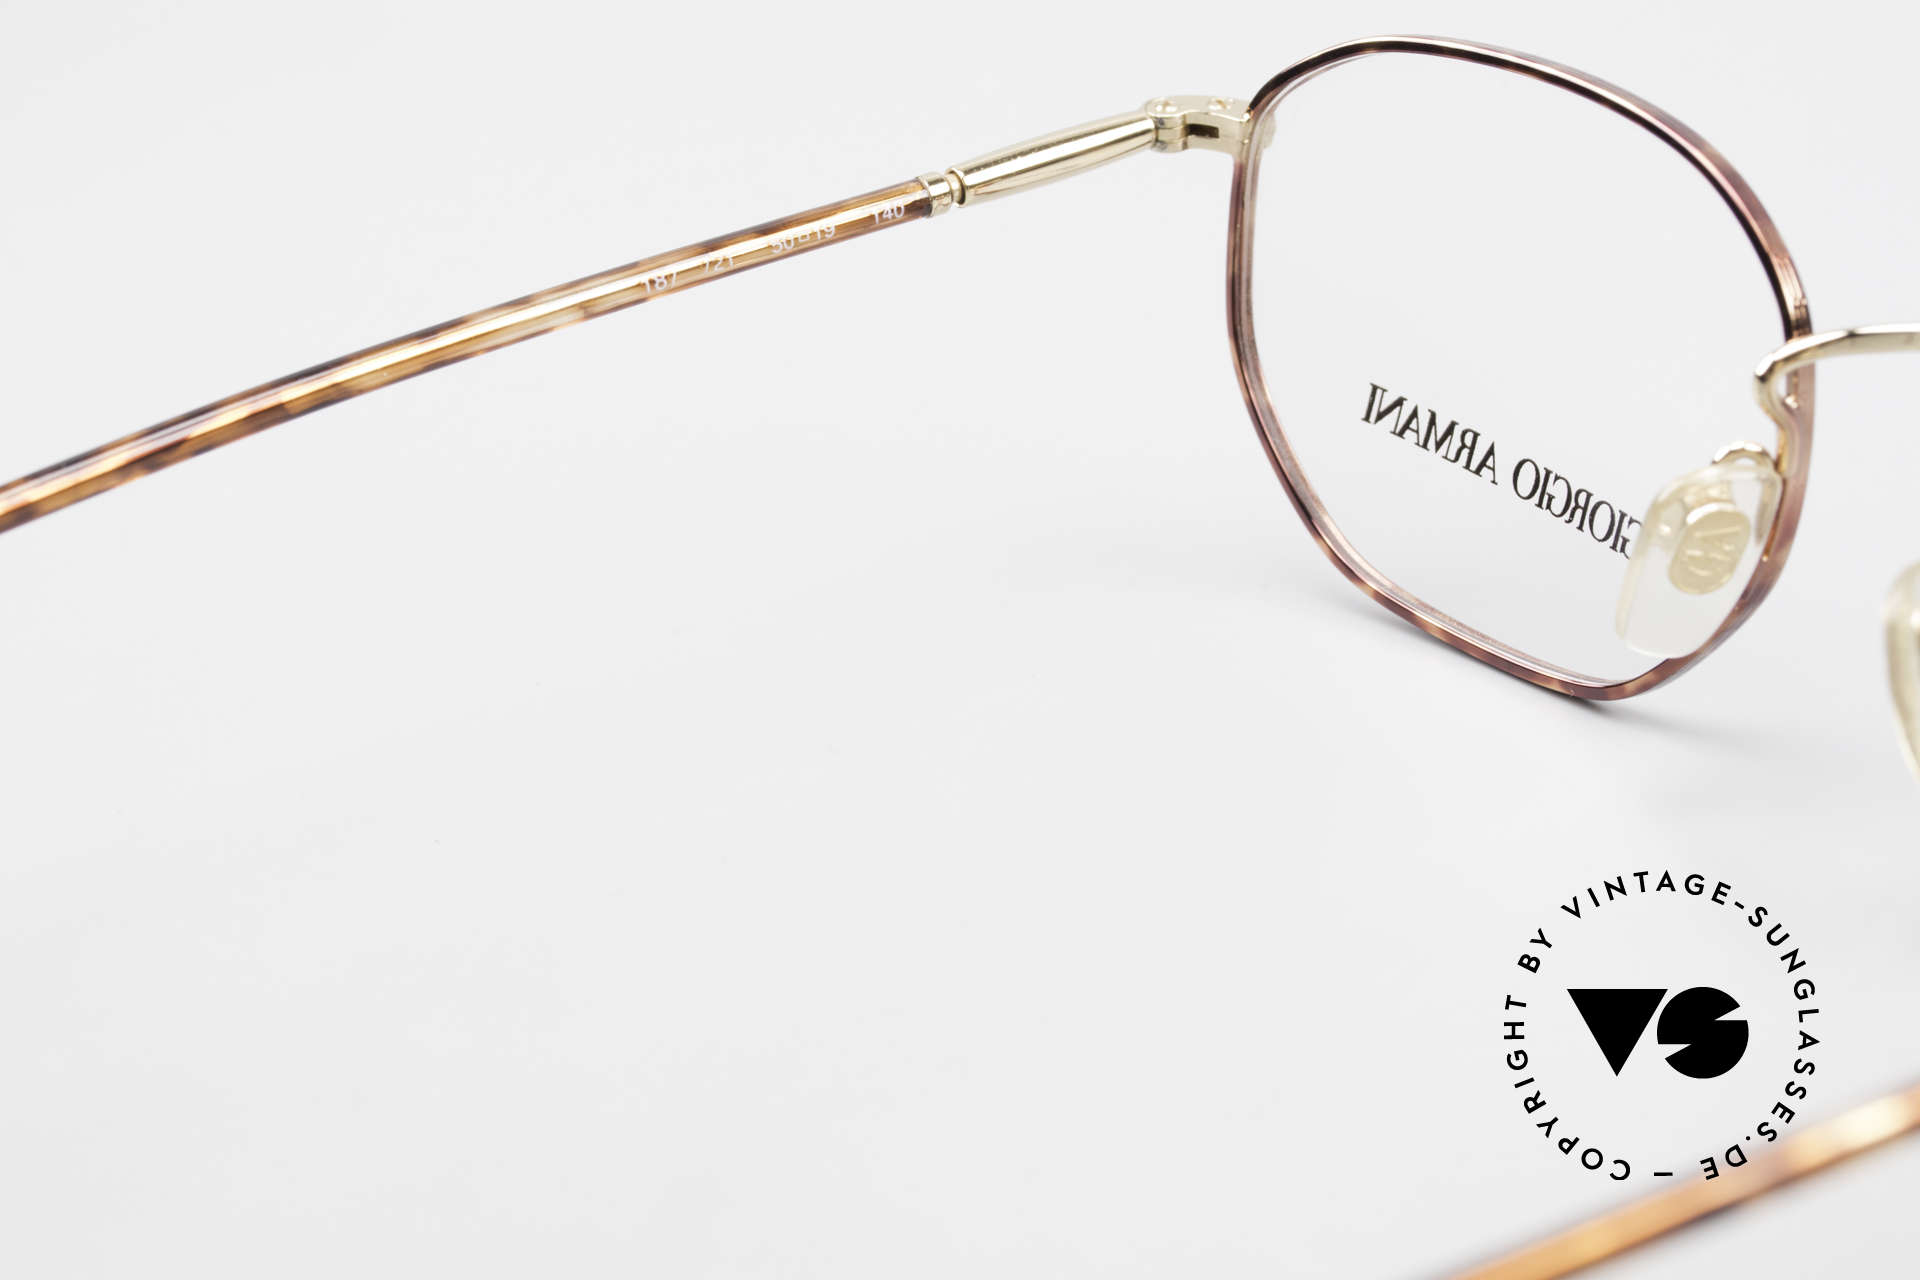 Giorgio Armani 187 Classic 90's Men's Eyeglasses, DEMO lenses can be replaced with optical (sun)lenses, Made for Men